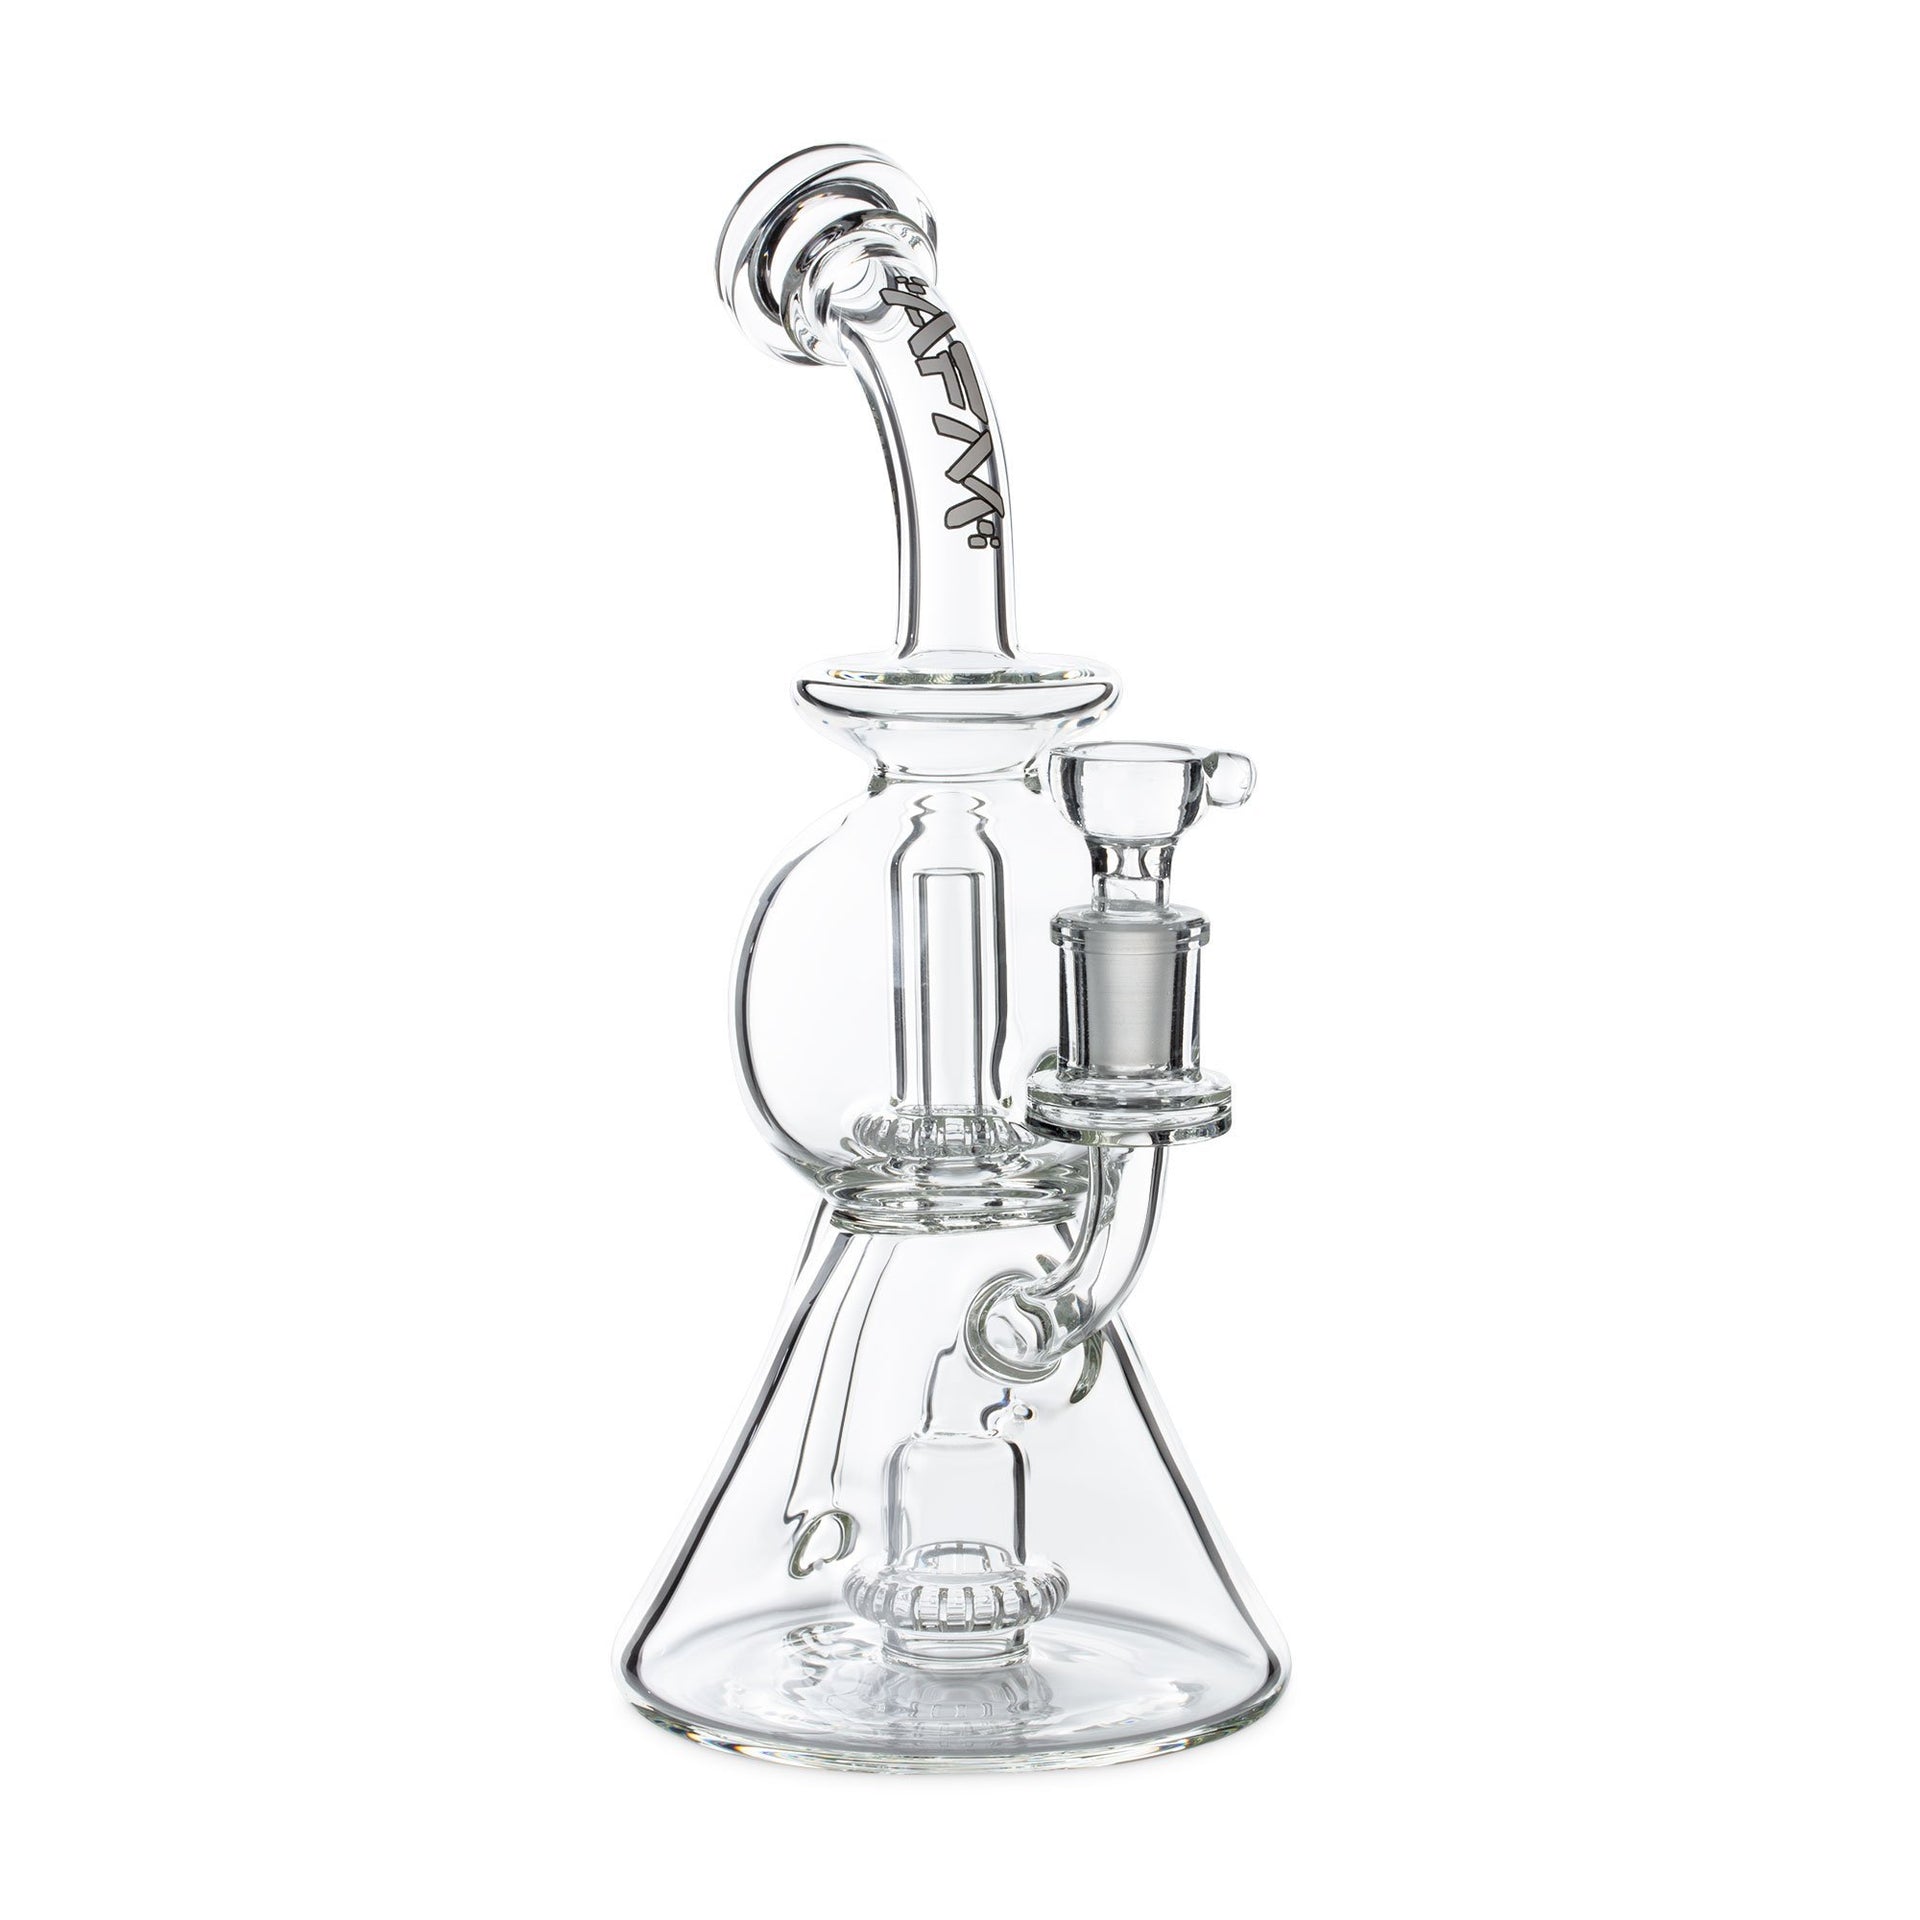 Upright Recycler Rig for Puffco Peak Pro